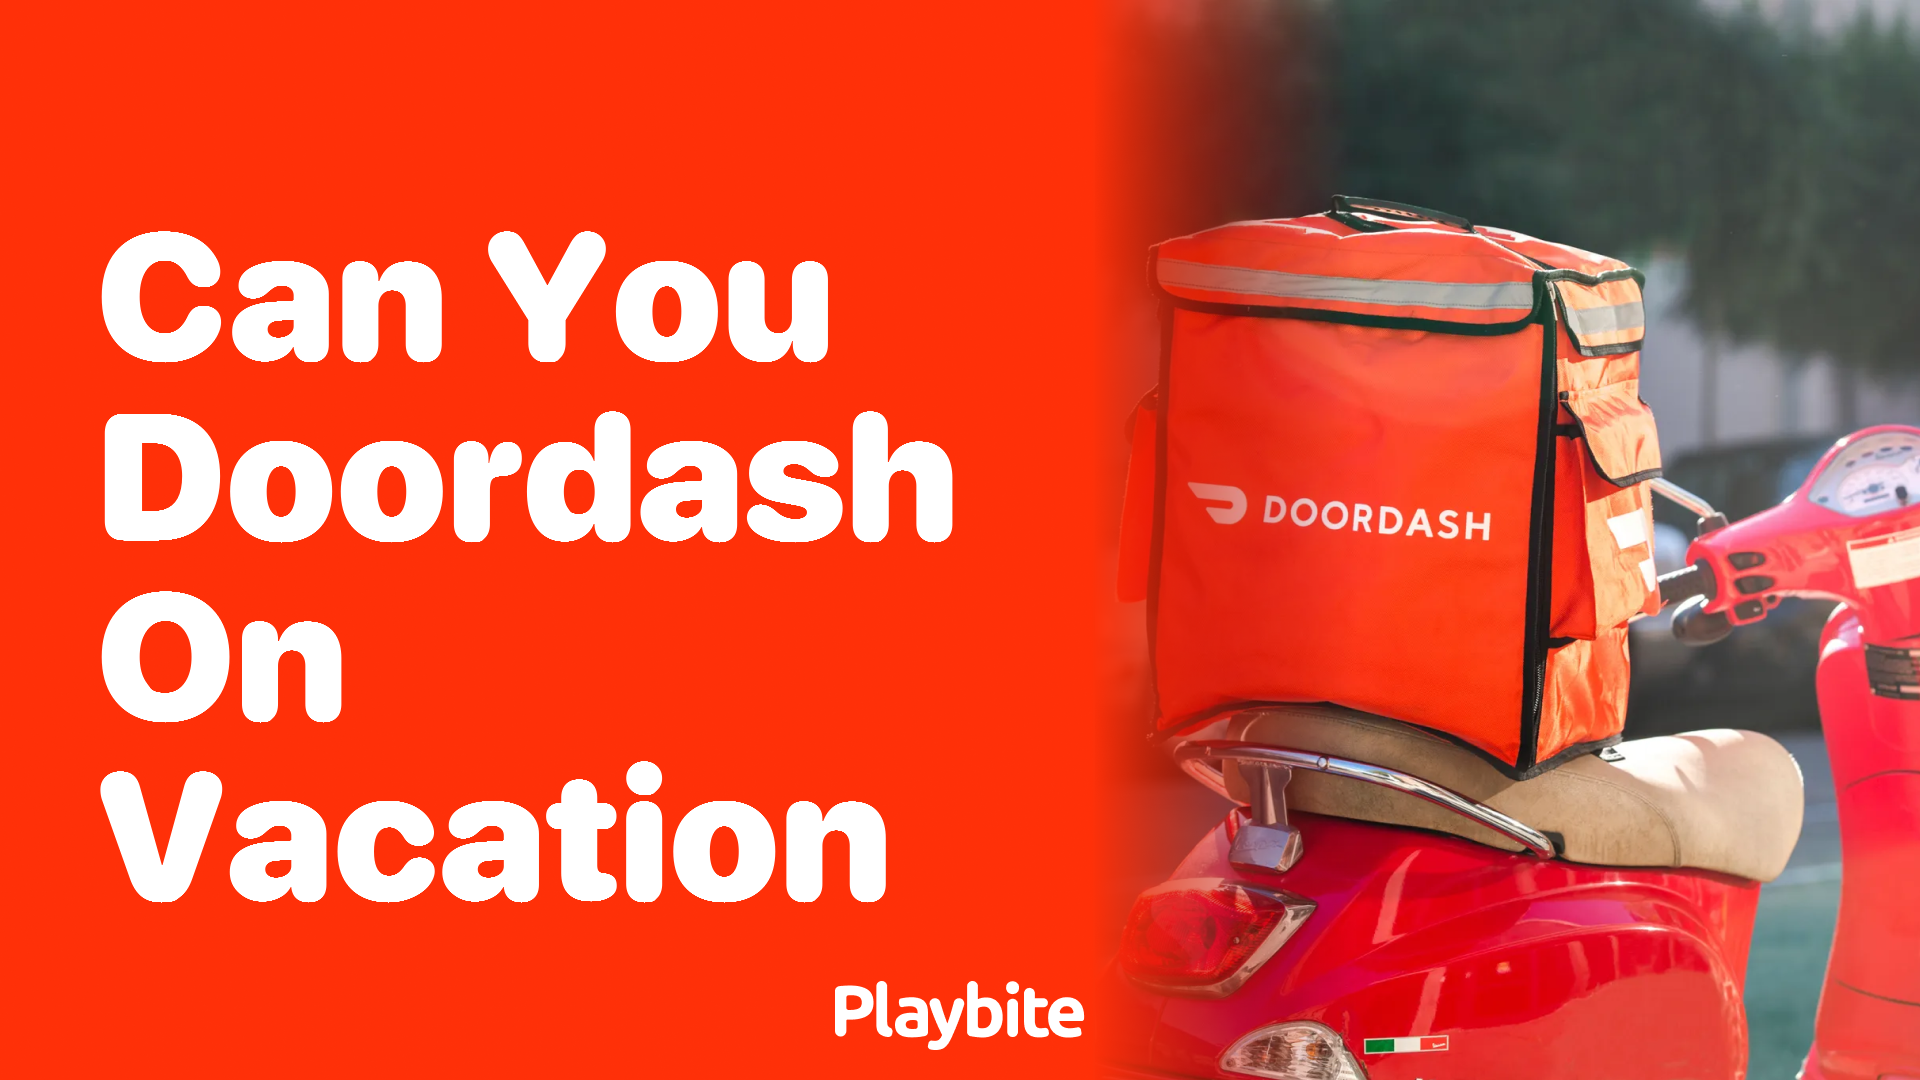 Can You Use DoorDash While on Vacation?